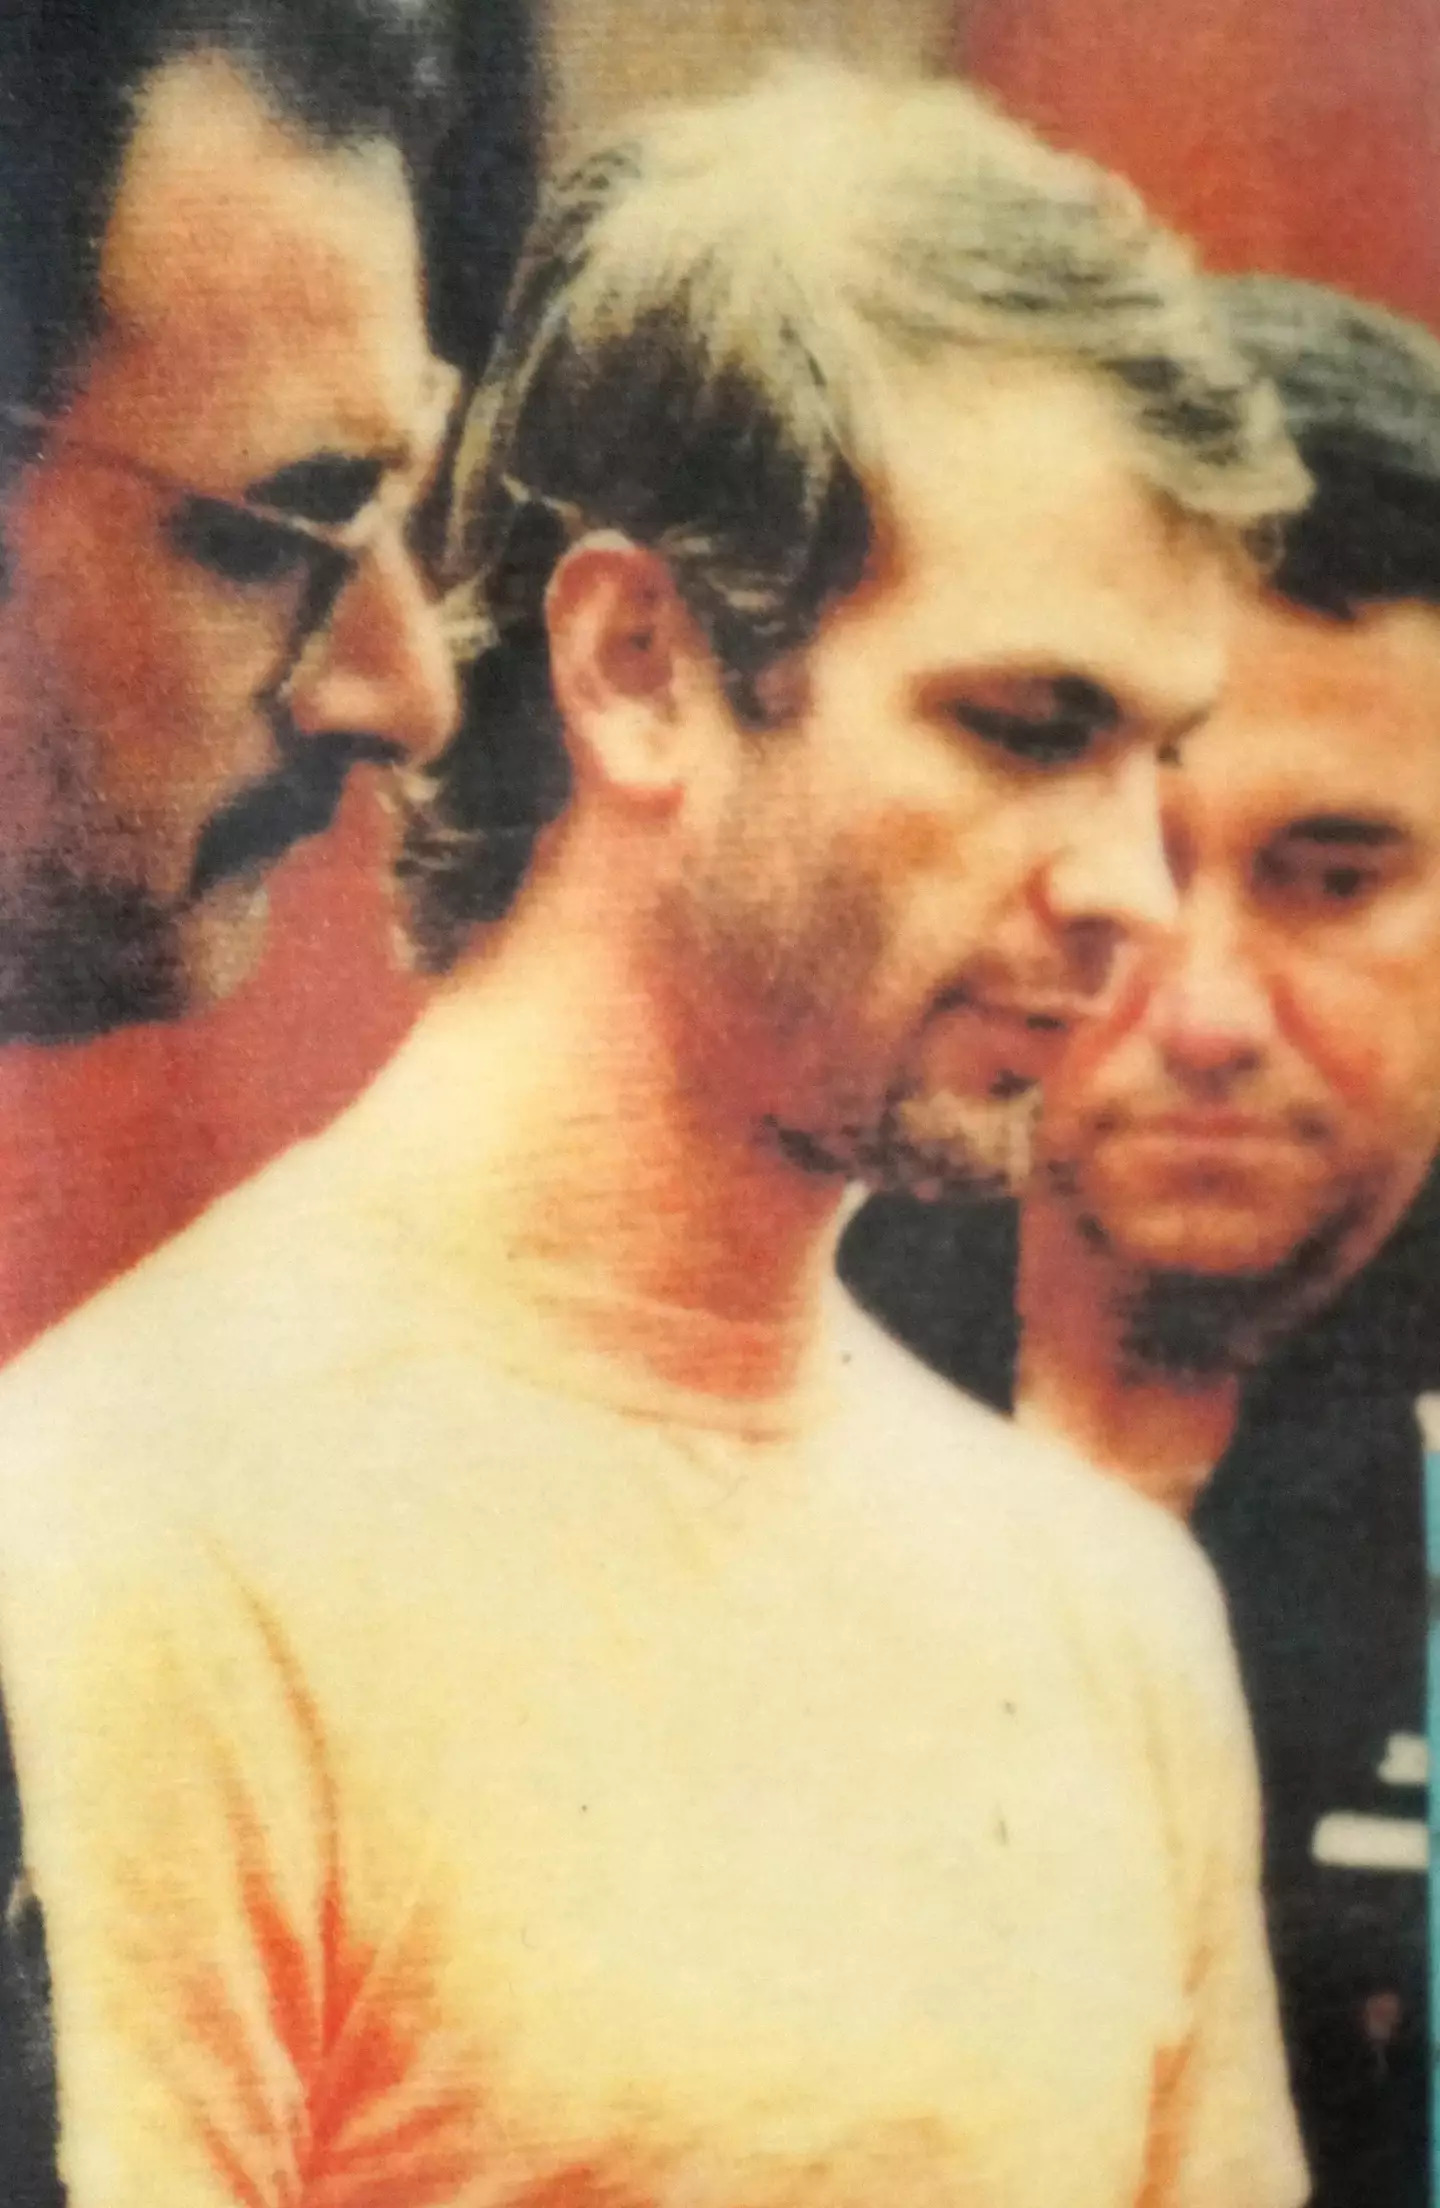 The Department of Justice said Seneca’s sick plot ‘mirrored’ the murders carried out by Jeffrey Dahmer.